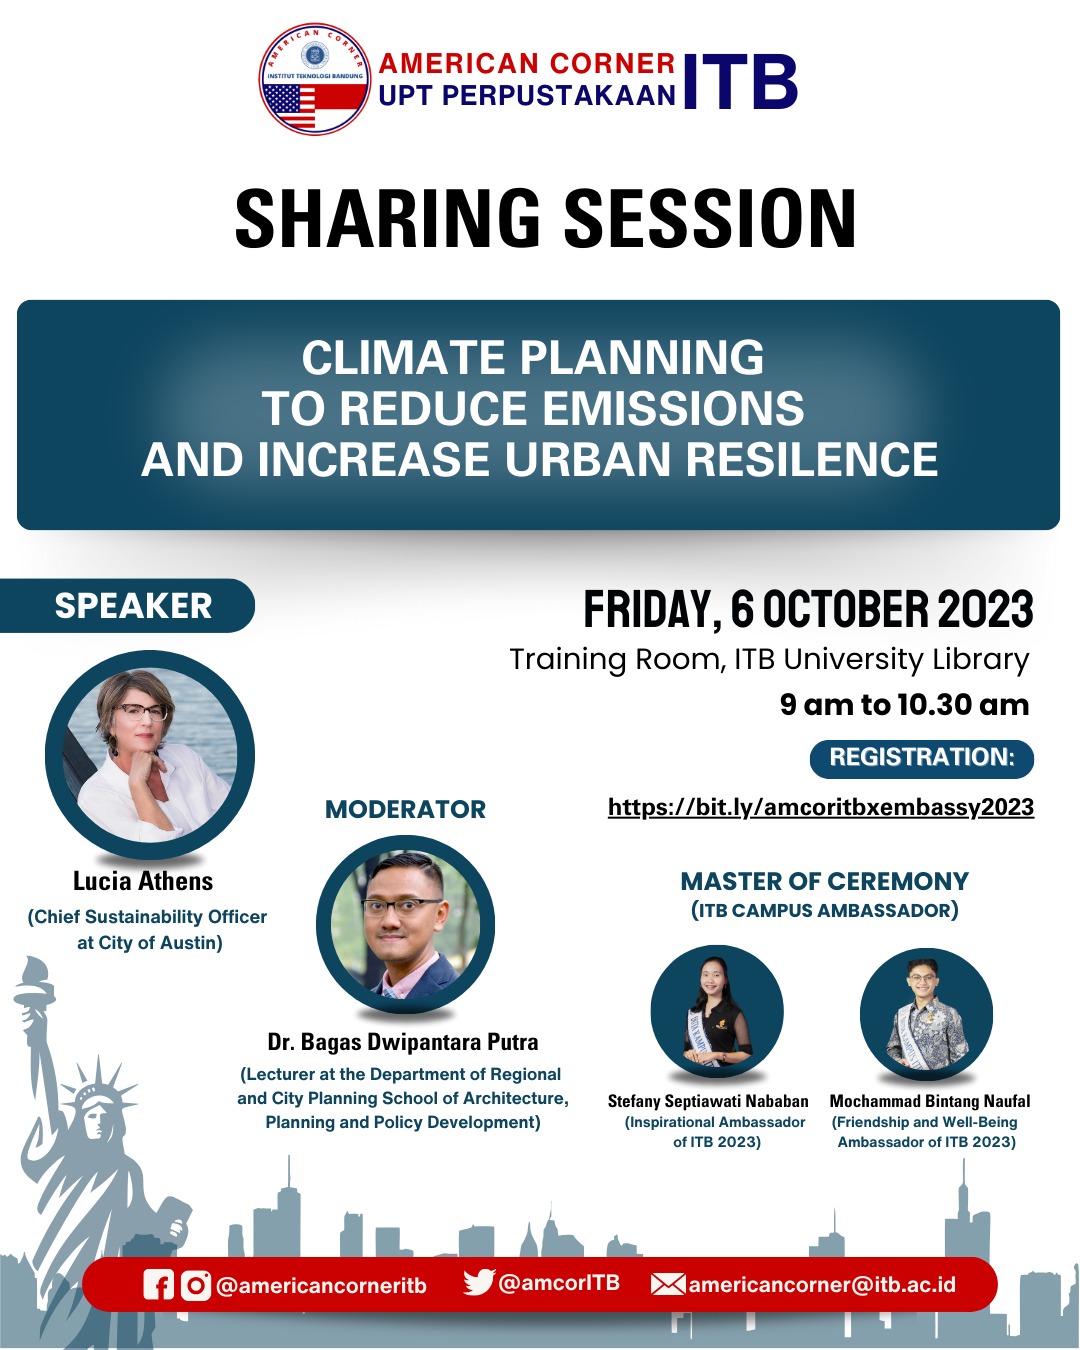 sharing session on “Climate Planning to Reduce Emissions and Increase Urban Resilience”